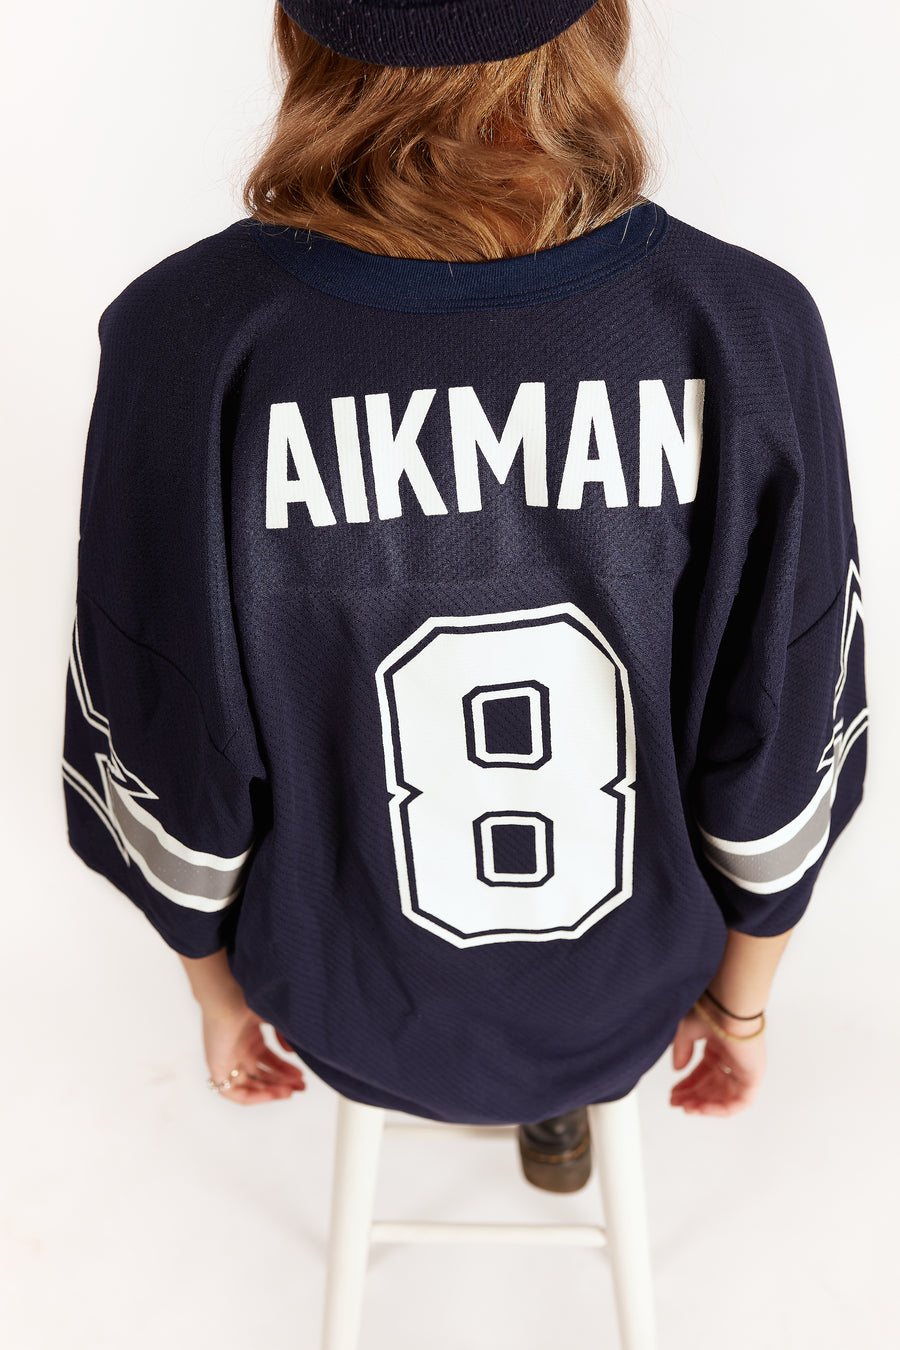 90's Dallas Cowboys Troy Aikman Logo 7 Jersey in a vintage style from thrift store Twise Studio